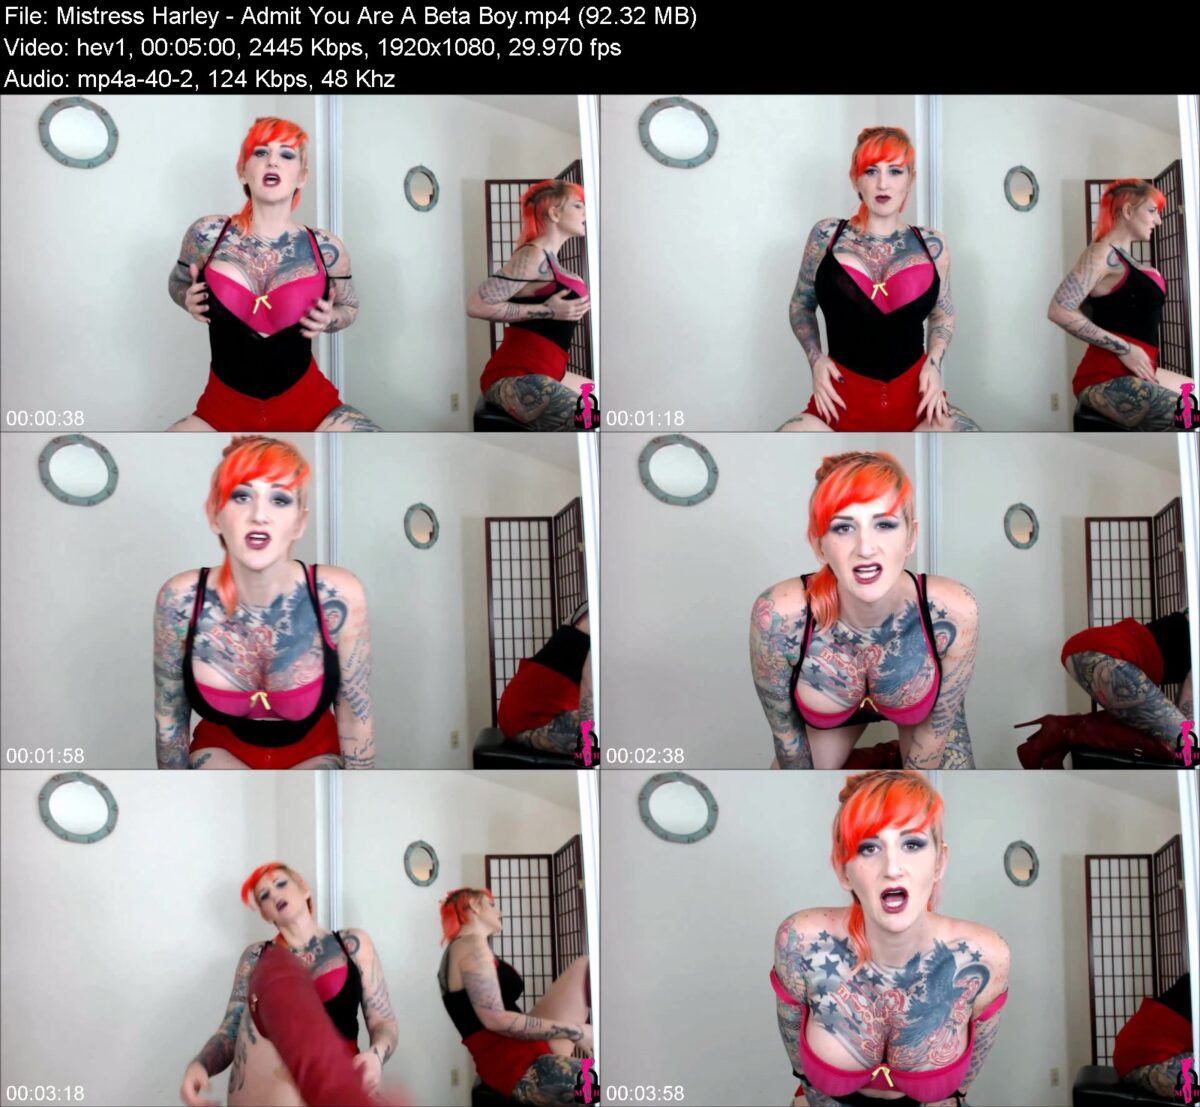 Actress: Mistress Harley. Title and Studio: Admit You Are A Beta Boy